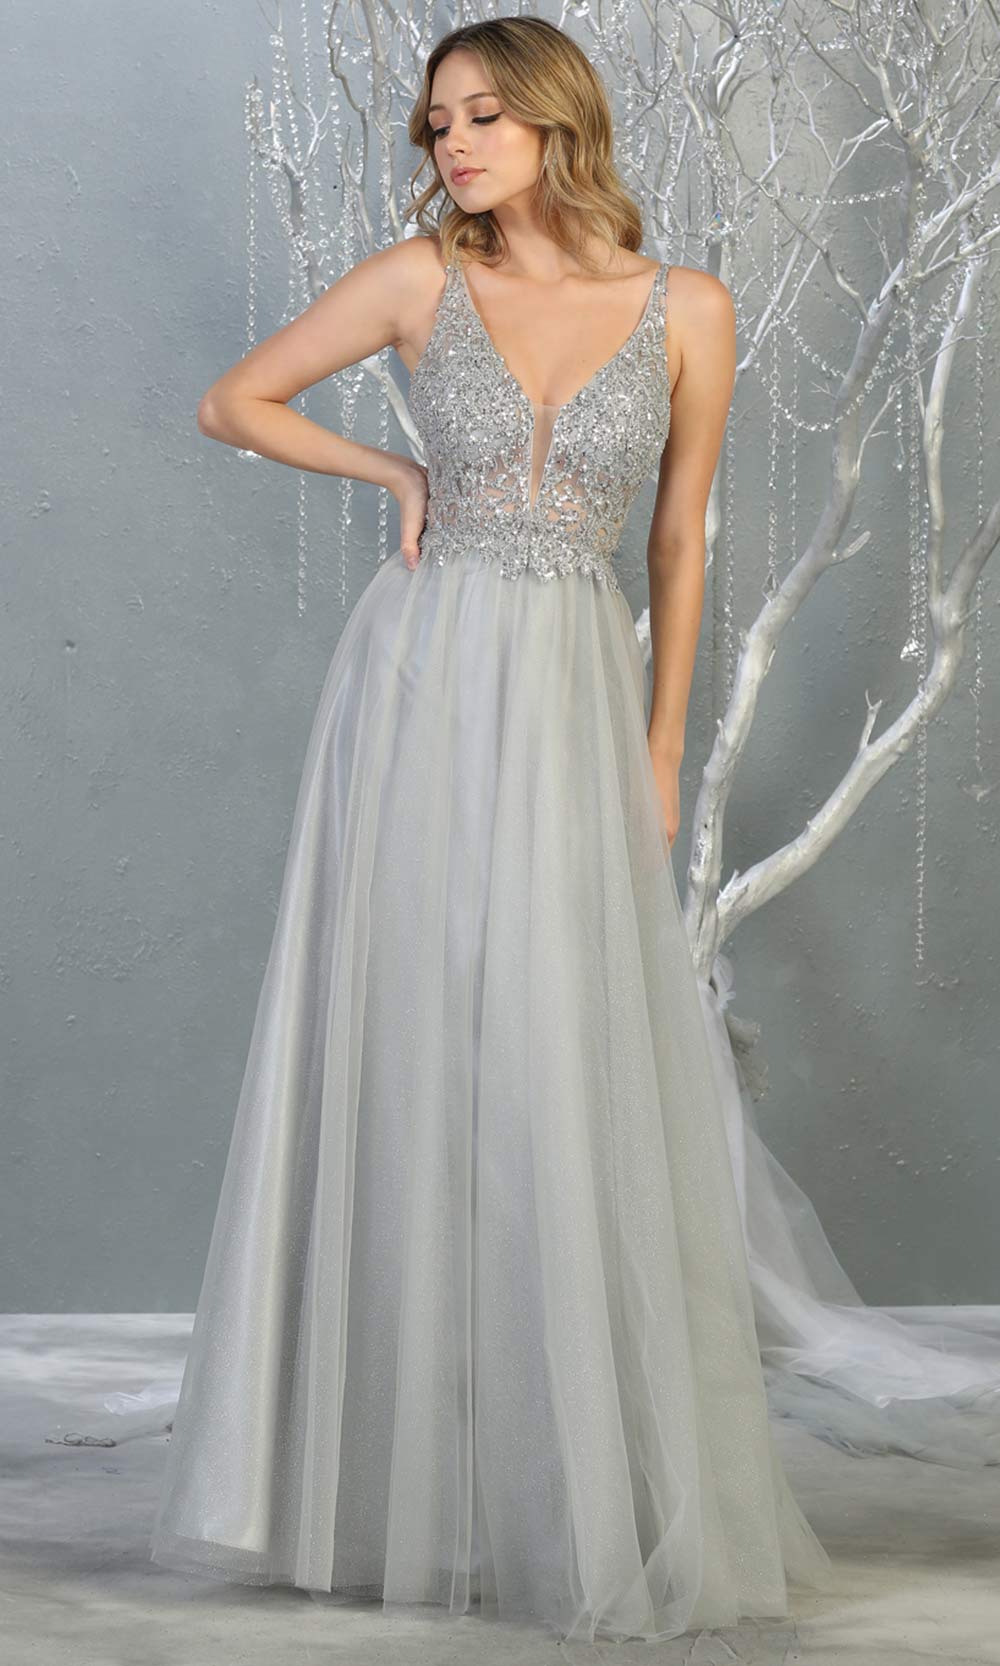 Mayqueen MQ1798 long silver v neck evening flowy tulle dress. Full length light gray beaded top w/wide straps is perfect for  enagagement/e-shoot dress, formal wedding guest, indowestern gown, evening party dress, prom, bridesmaid. Plus sizes avail.jpg